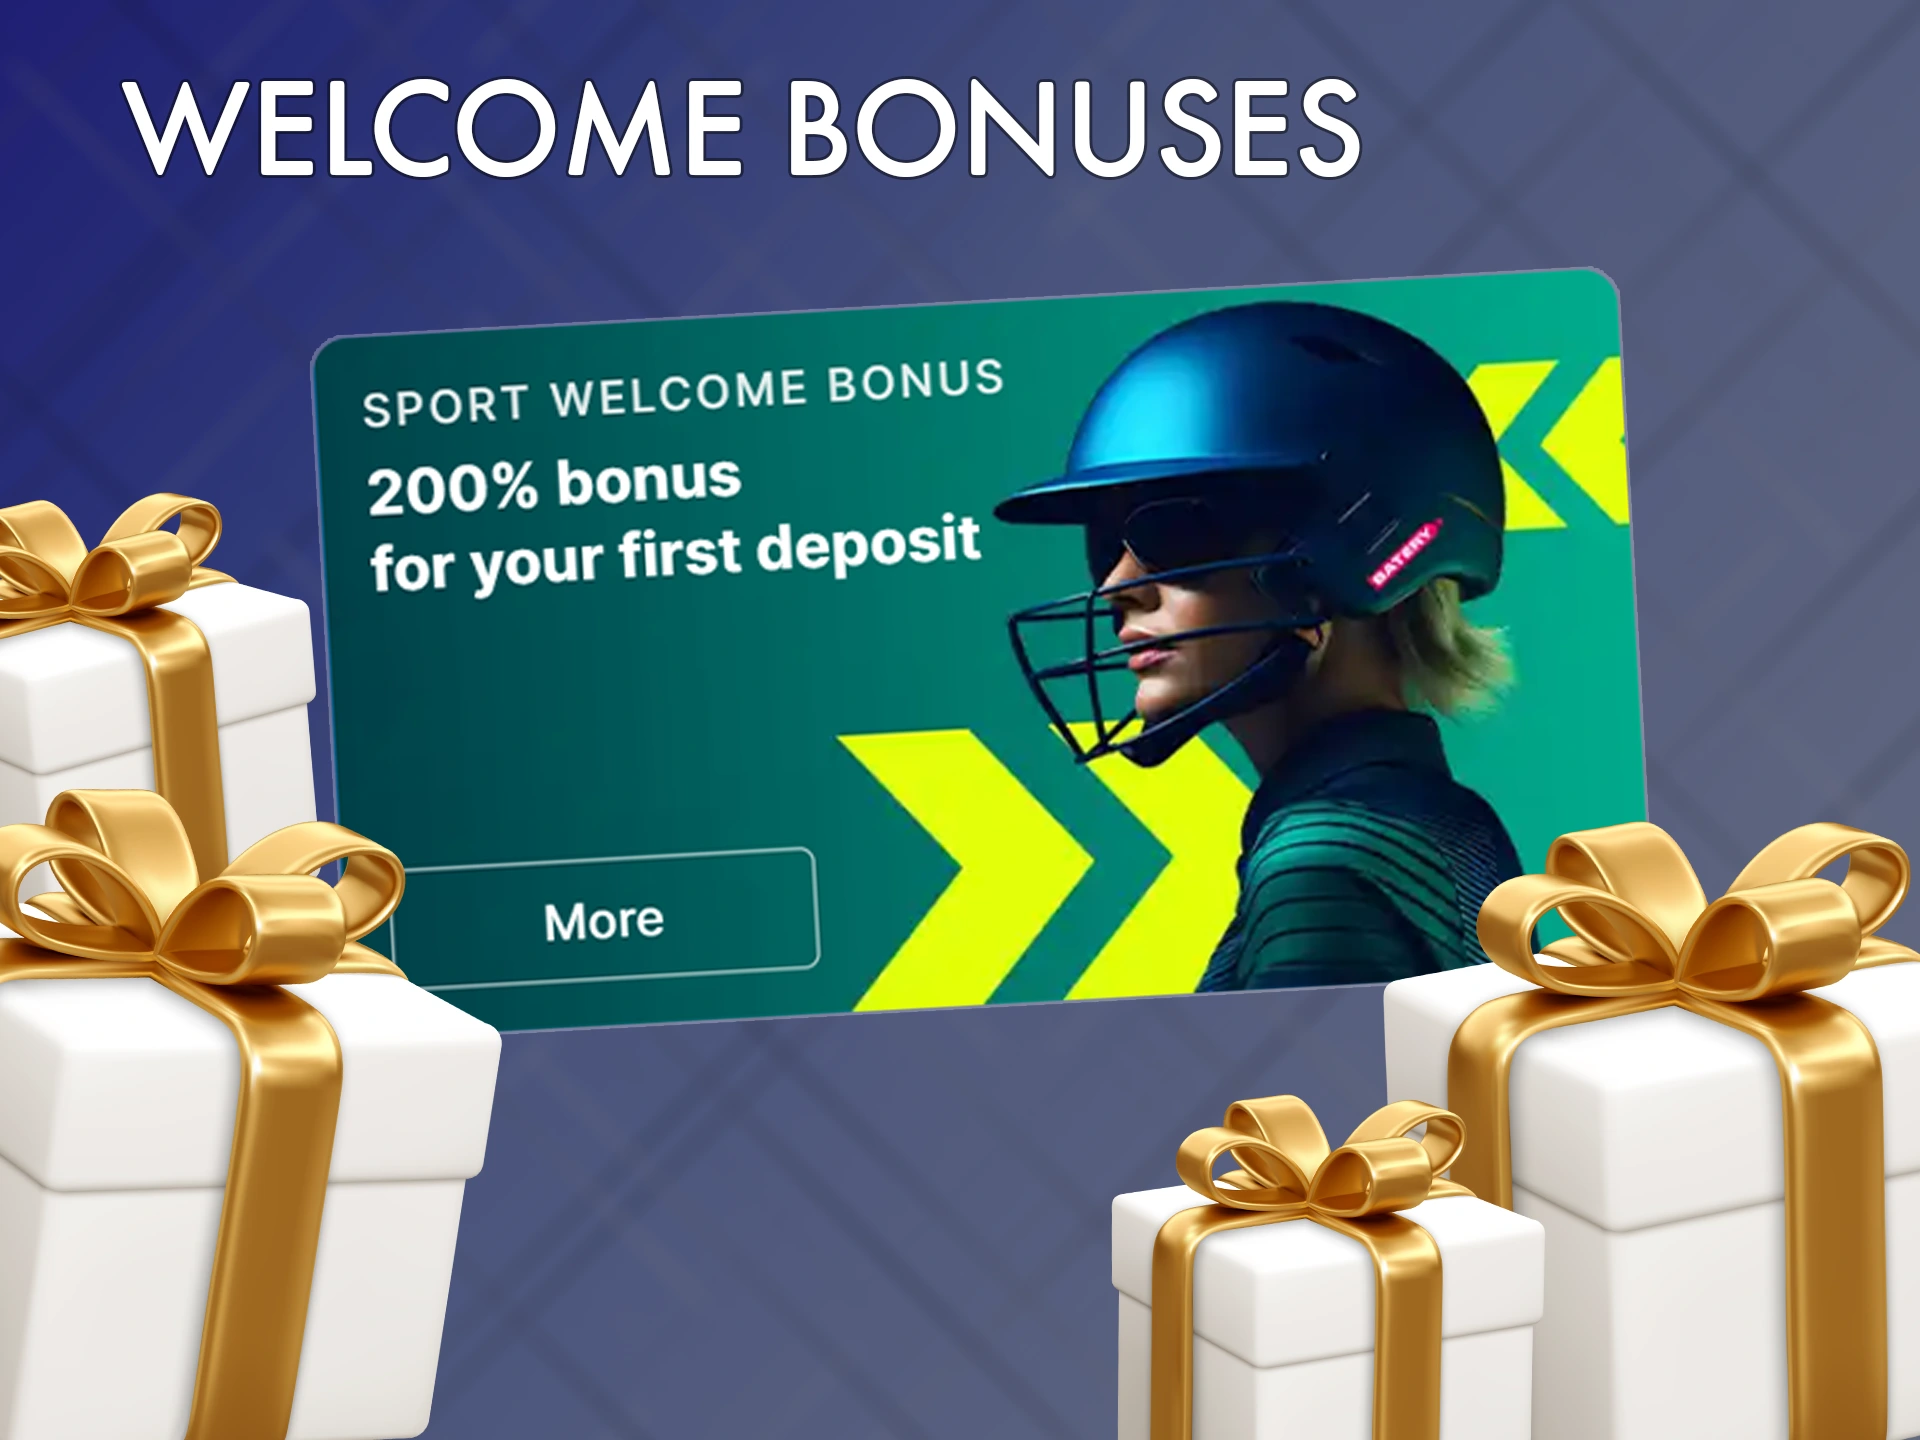 Sign up on one of the bookmaker's websites and get your welcome bonus.